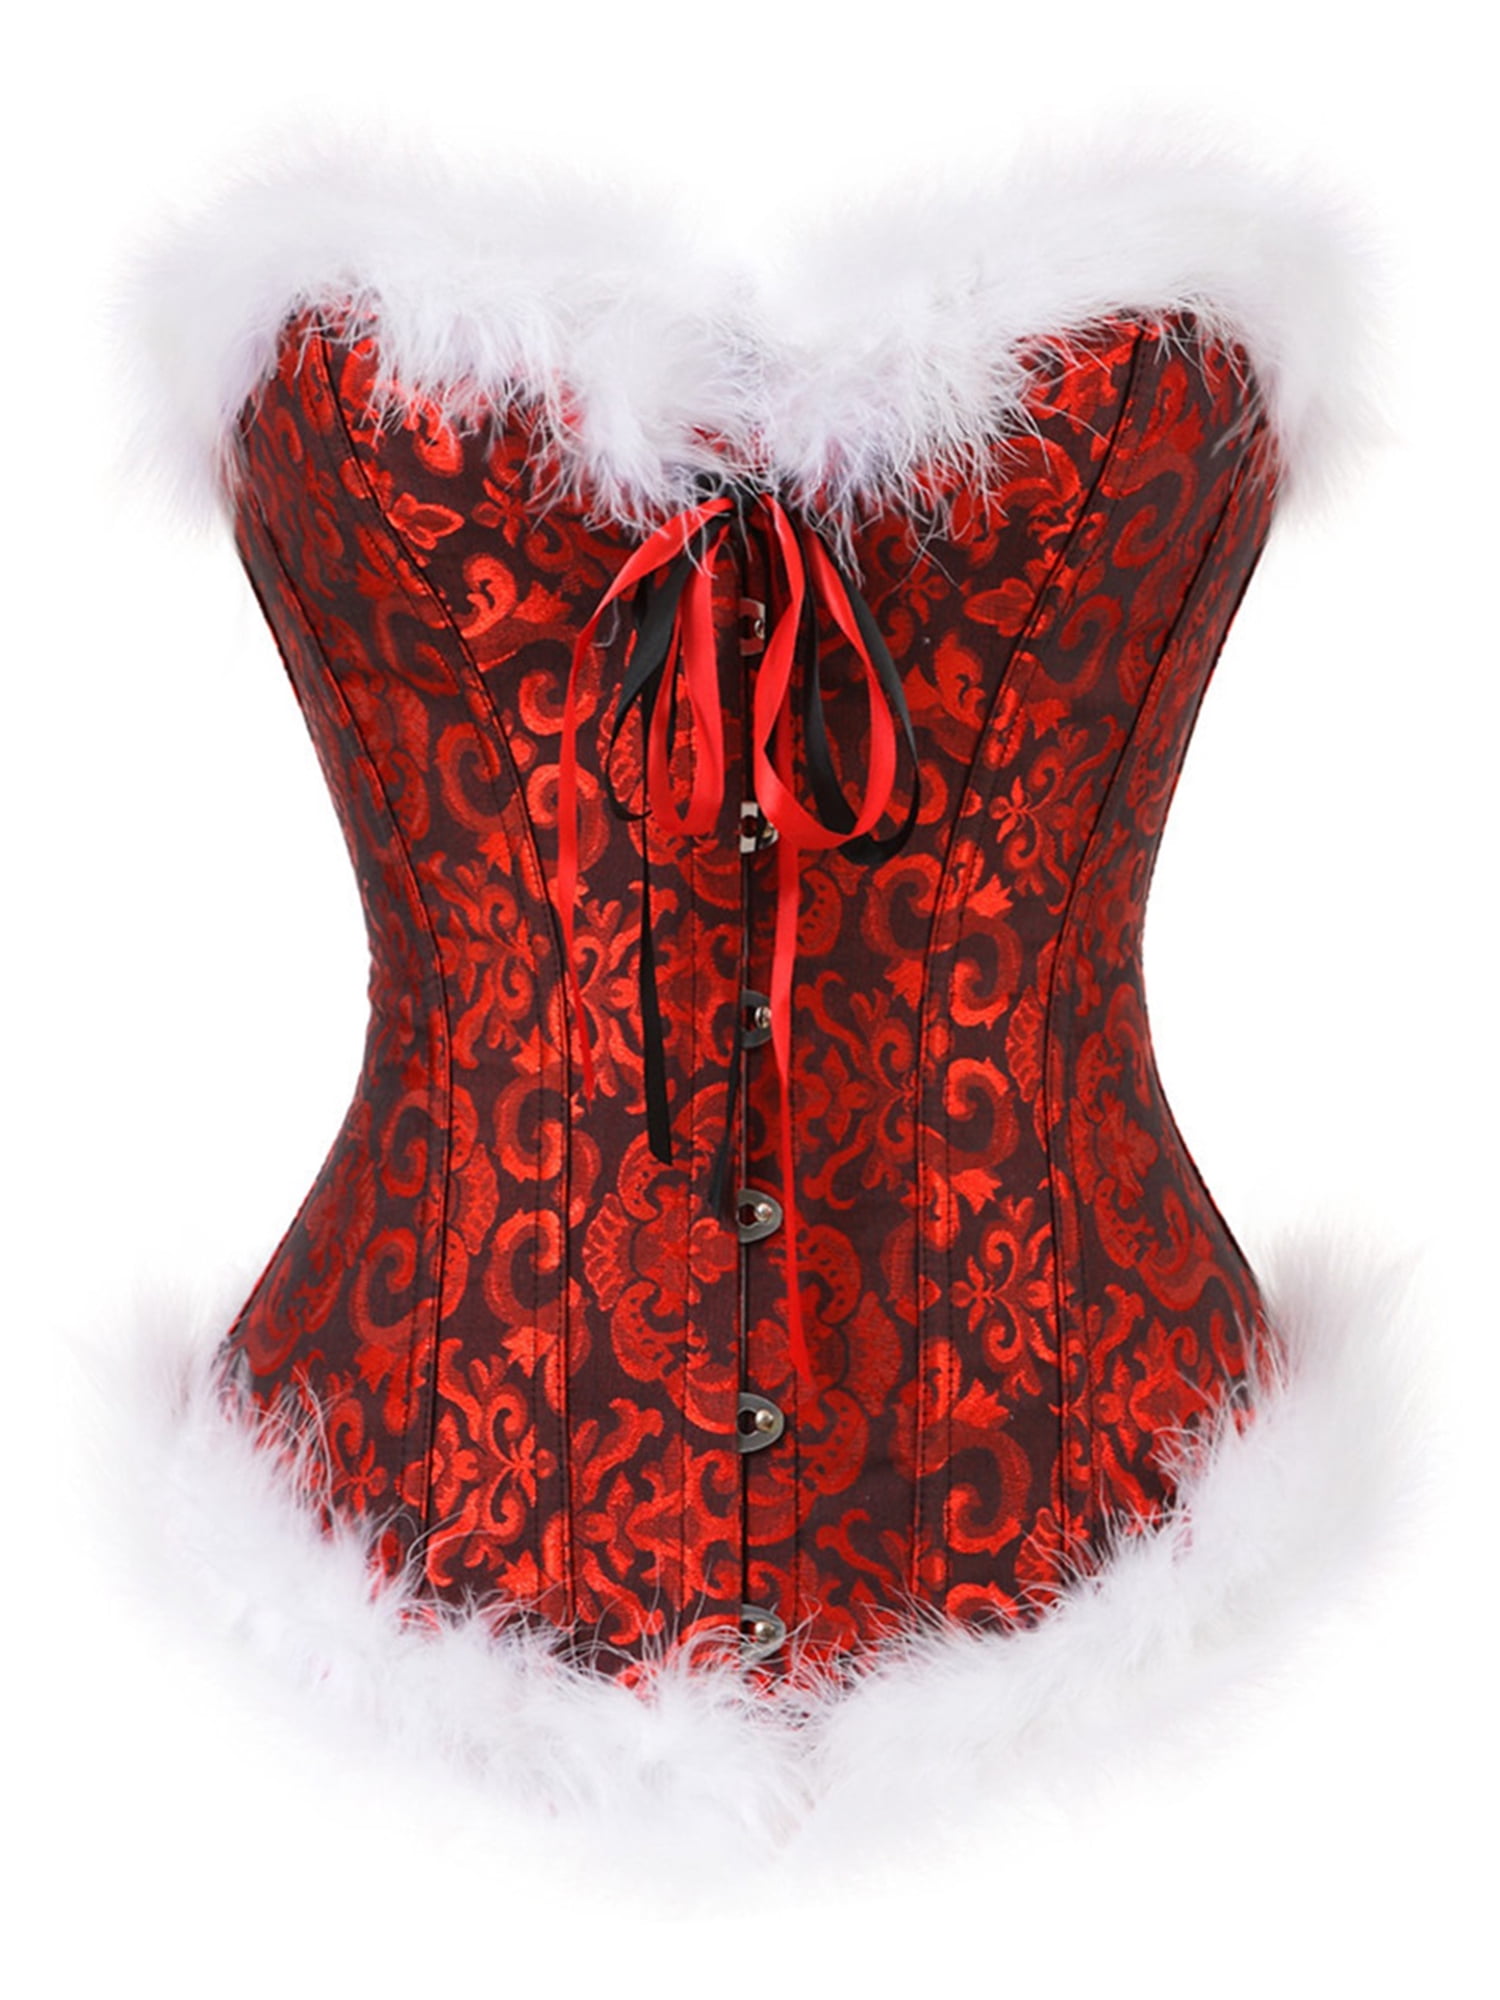 Christmas Lingerie Corset Top for Women Feathers Front Buckle Corset Red Naughty Christmas Costumes - Walmart.com